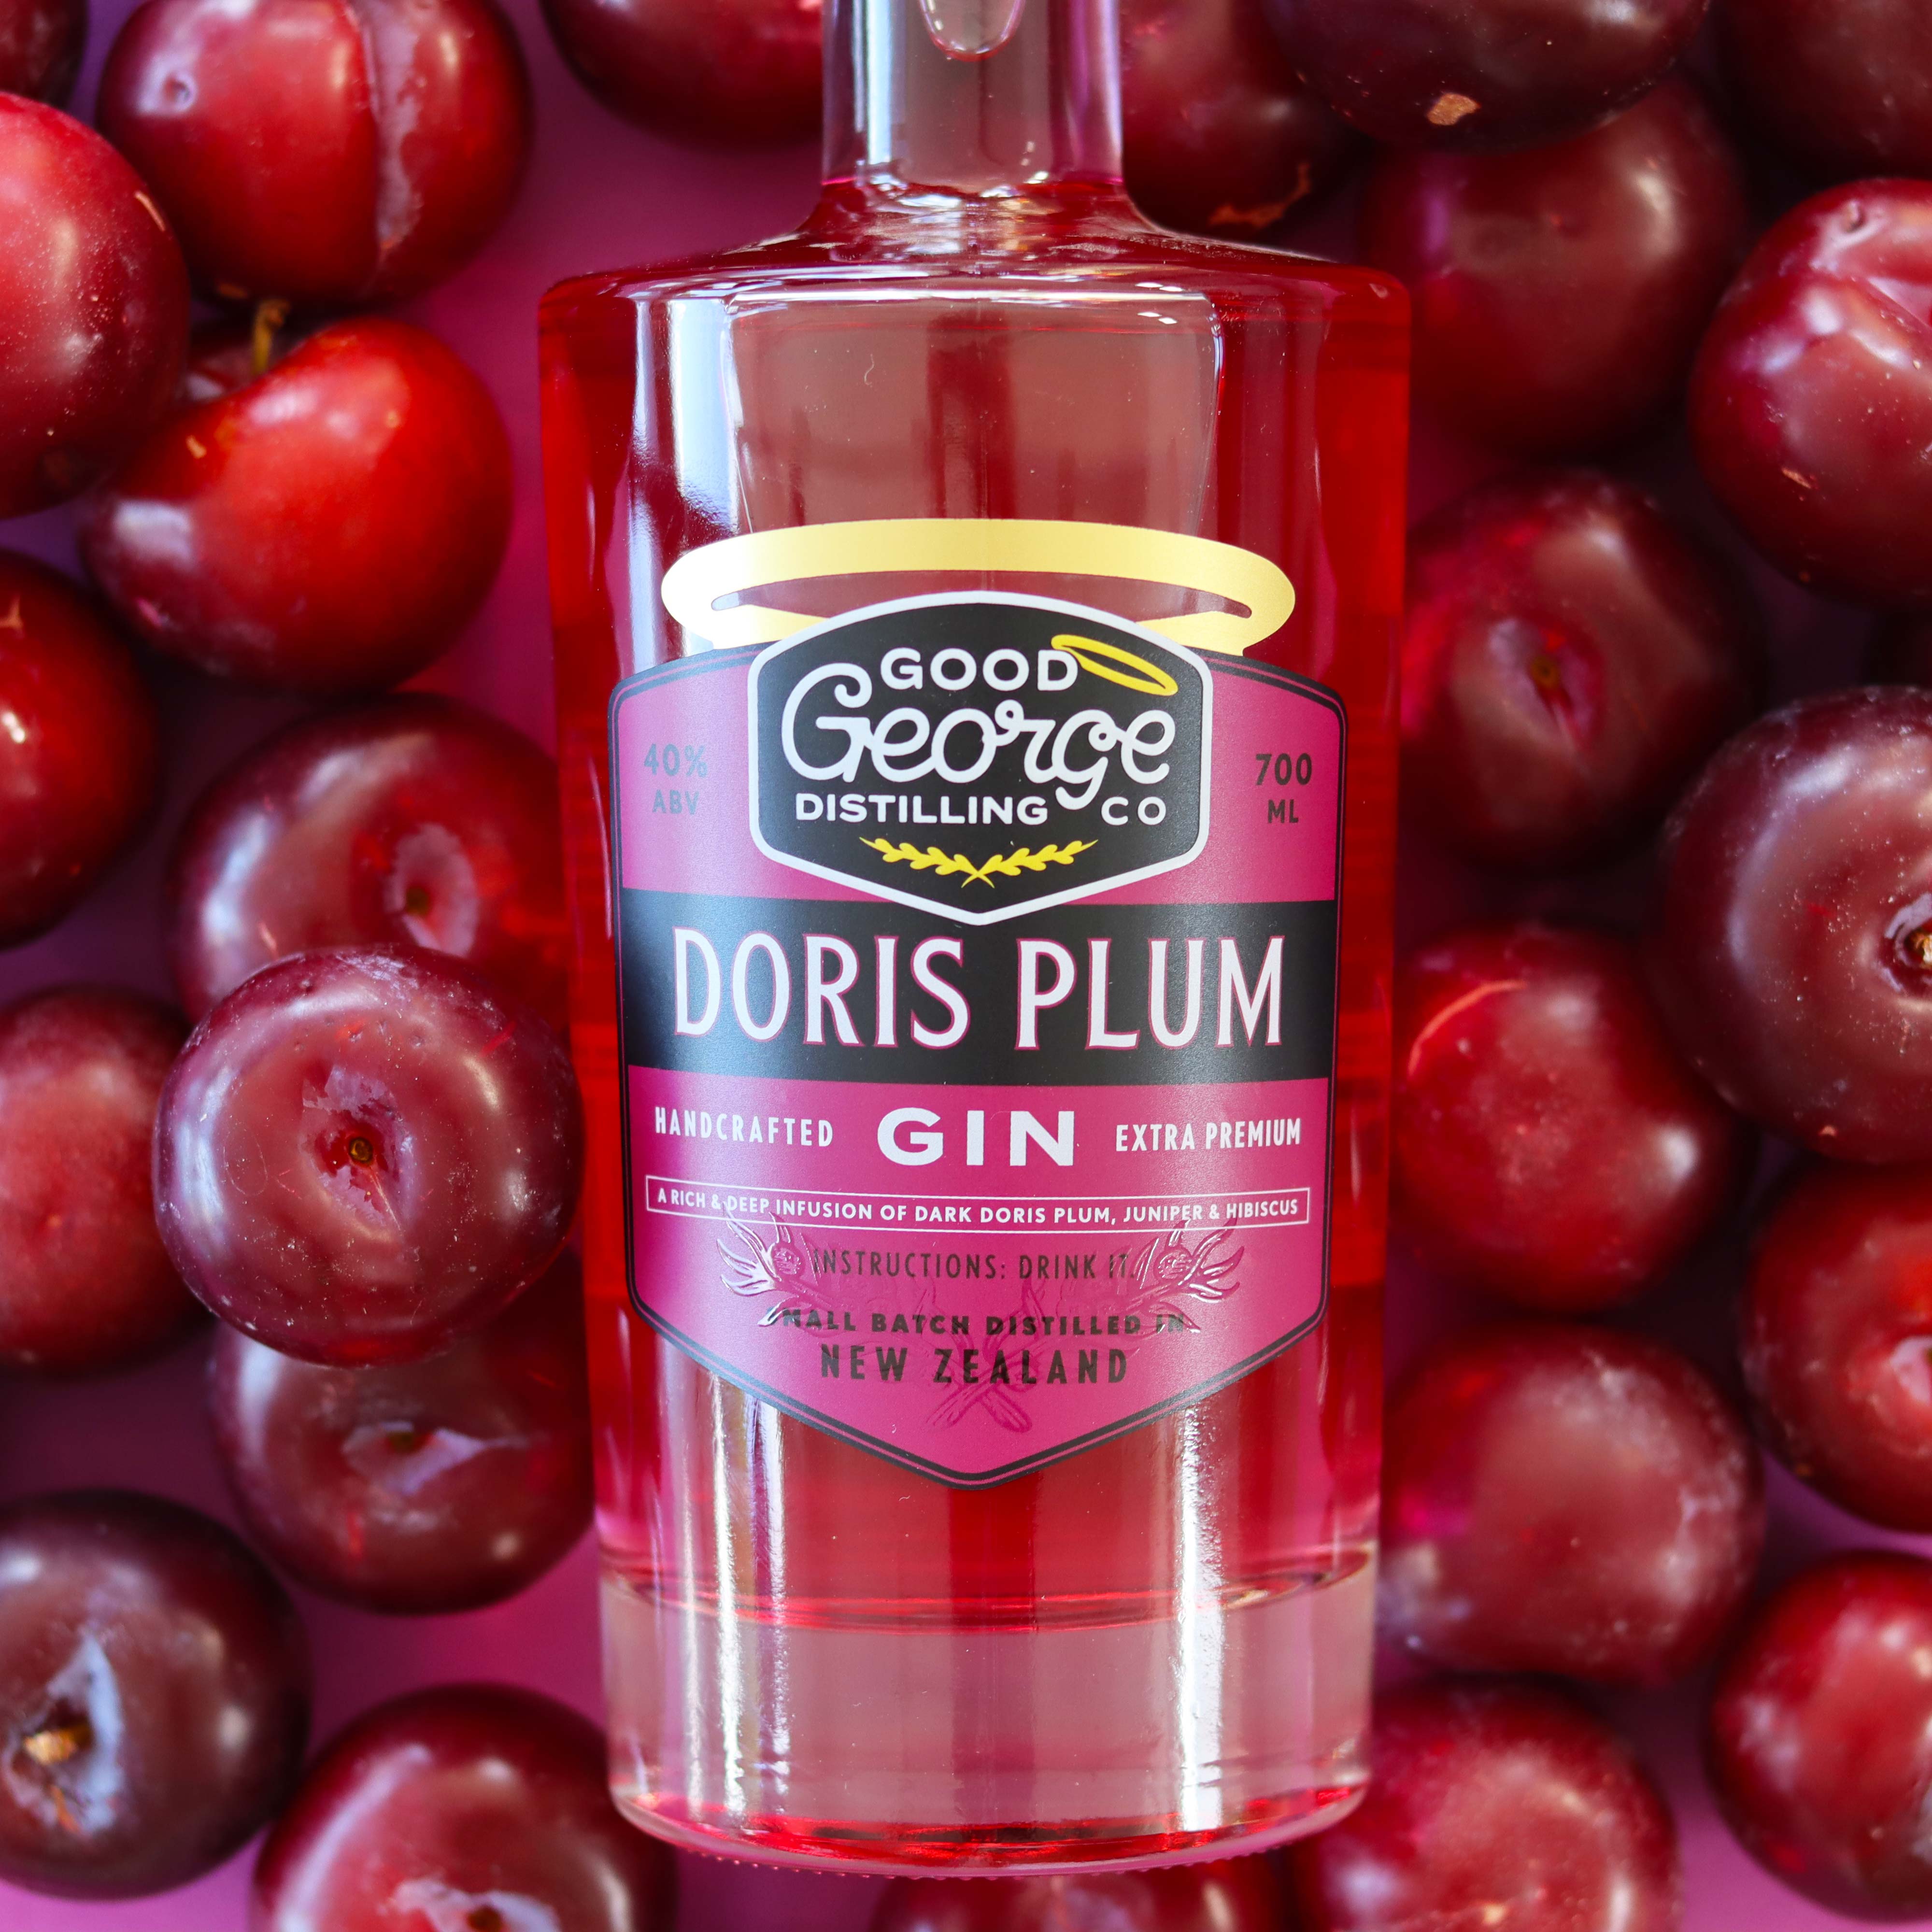 Good George Doris Plum Gin 700ml Bottle surrounded by fresh plums